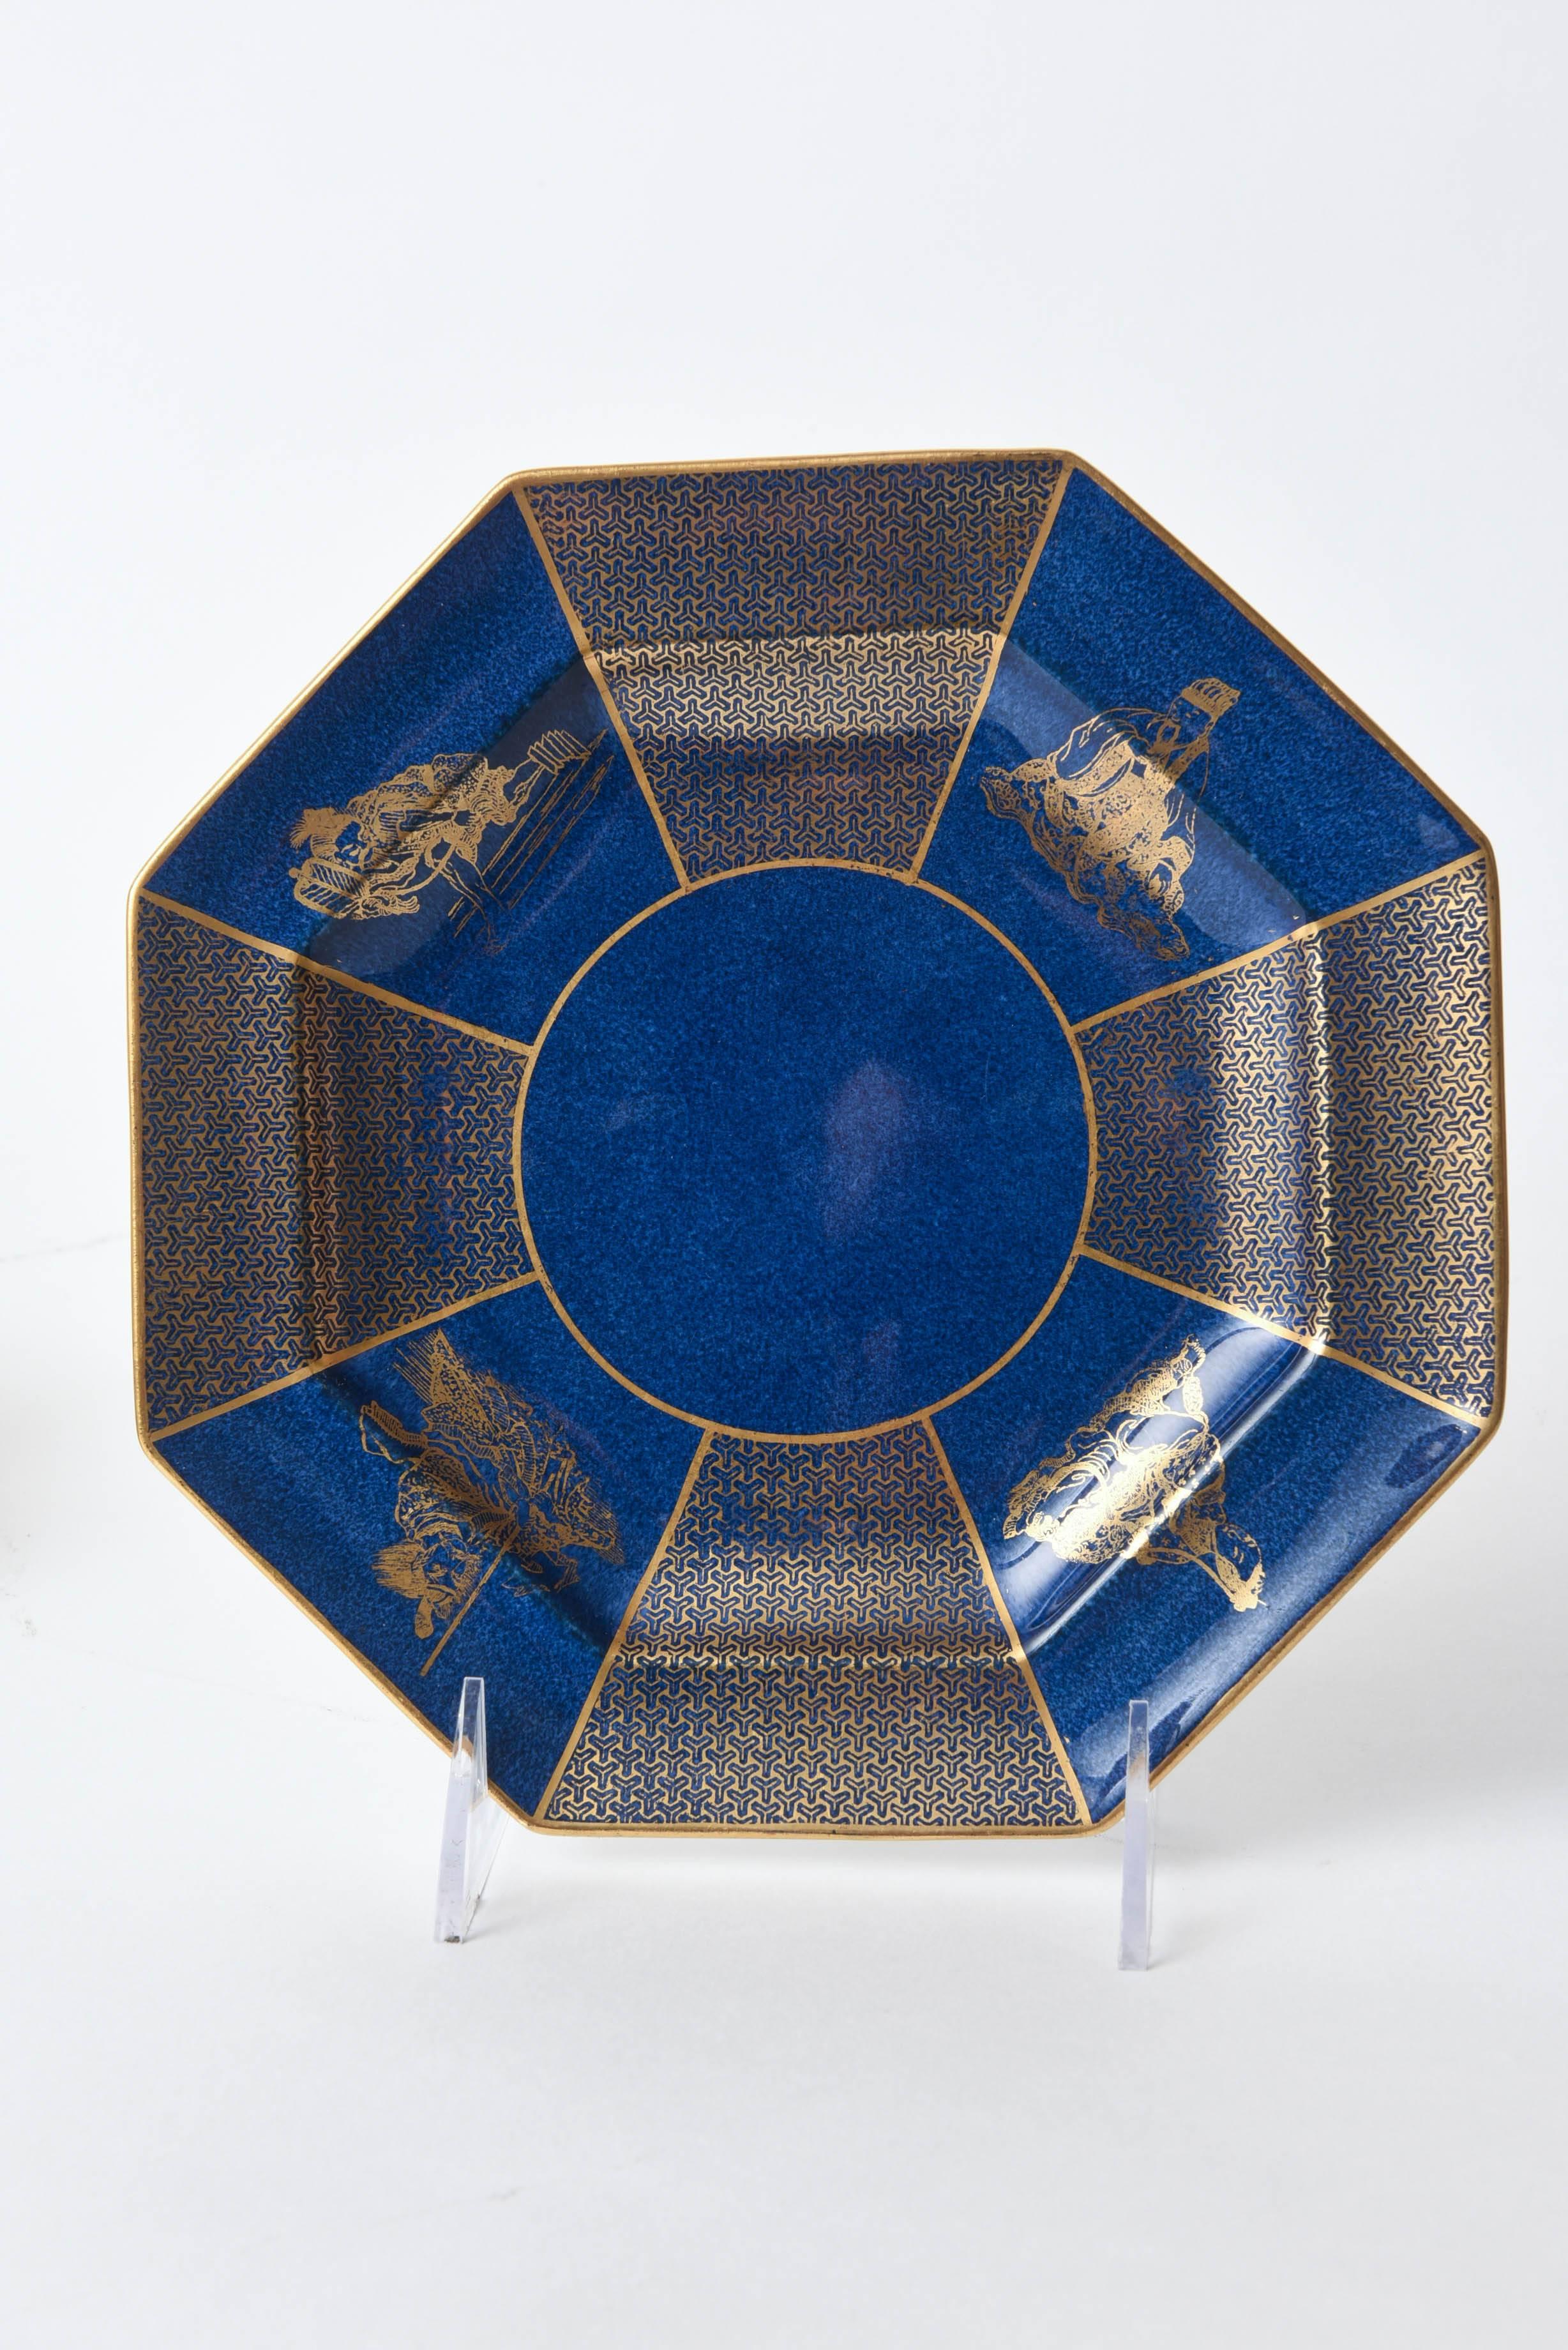 An interesting octagonal-shaped set of crushed lapis blue plates with a delightful Chinoisserie pattern on the rich royal blue ground. Custom ordered through the fine retailer of William Plummer New York in the early 1900s. Wonderful antique